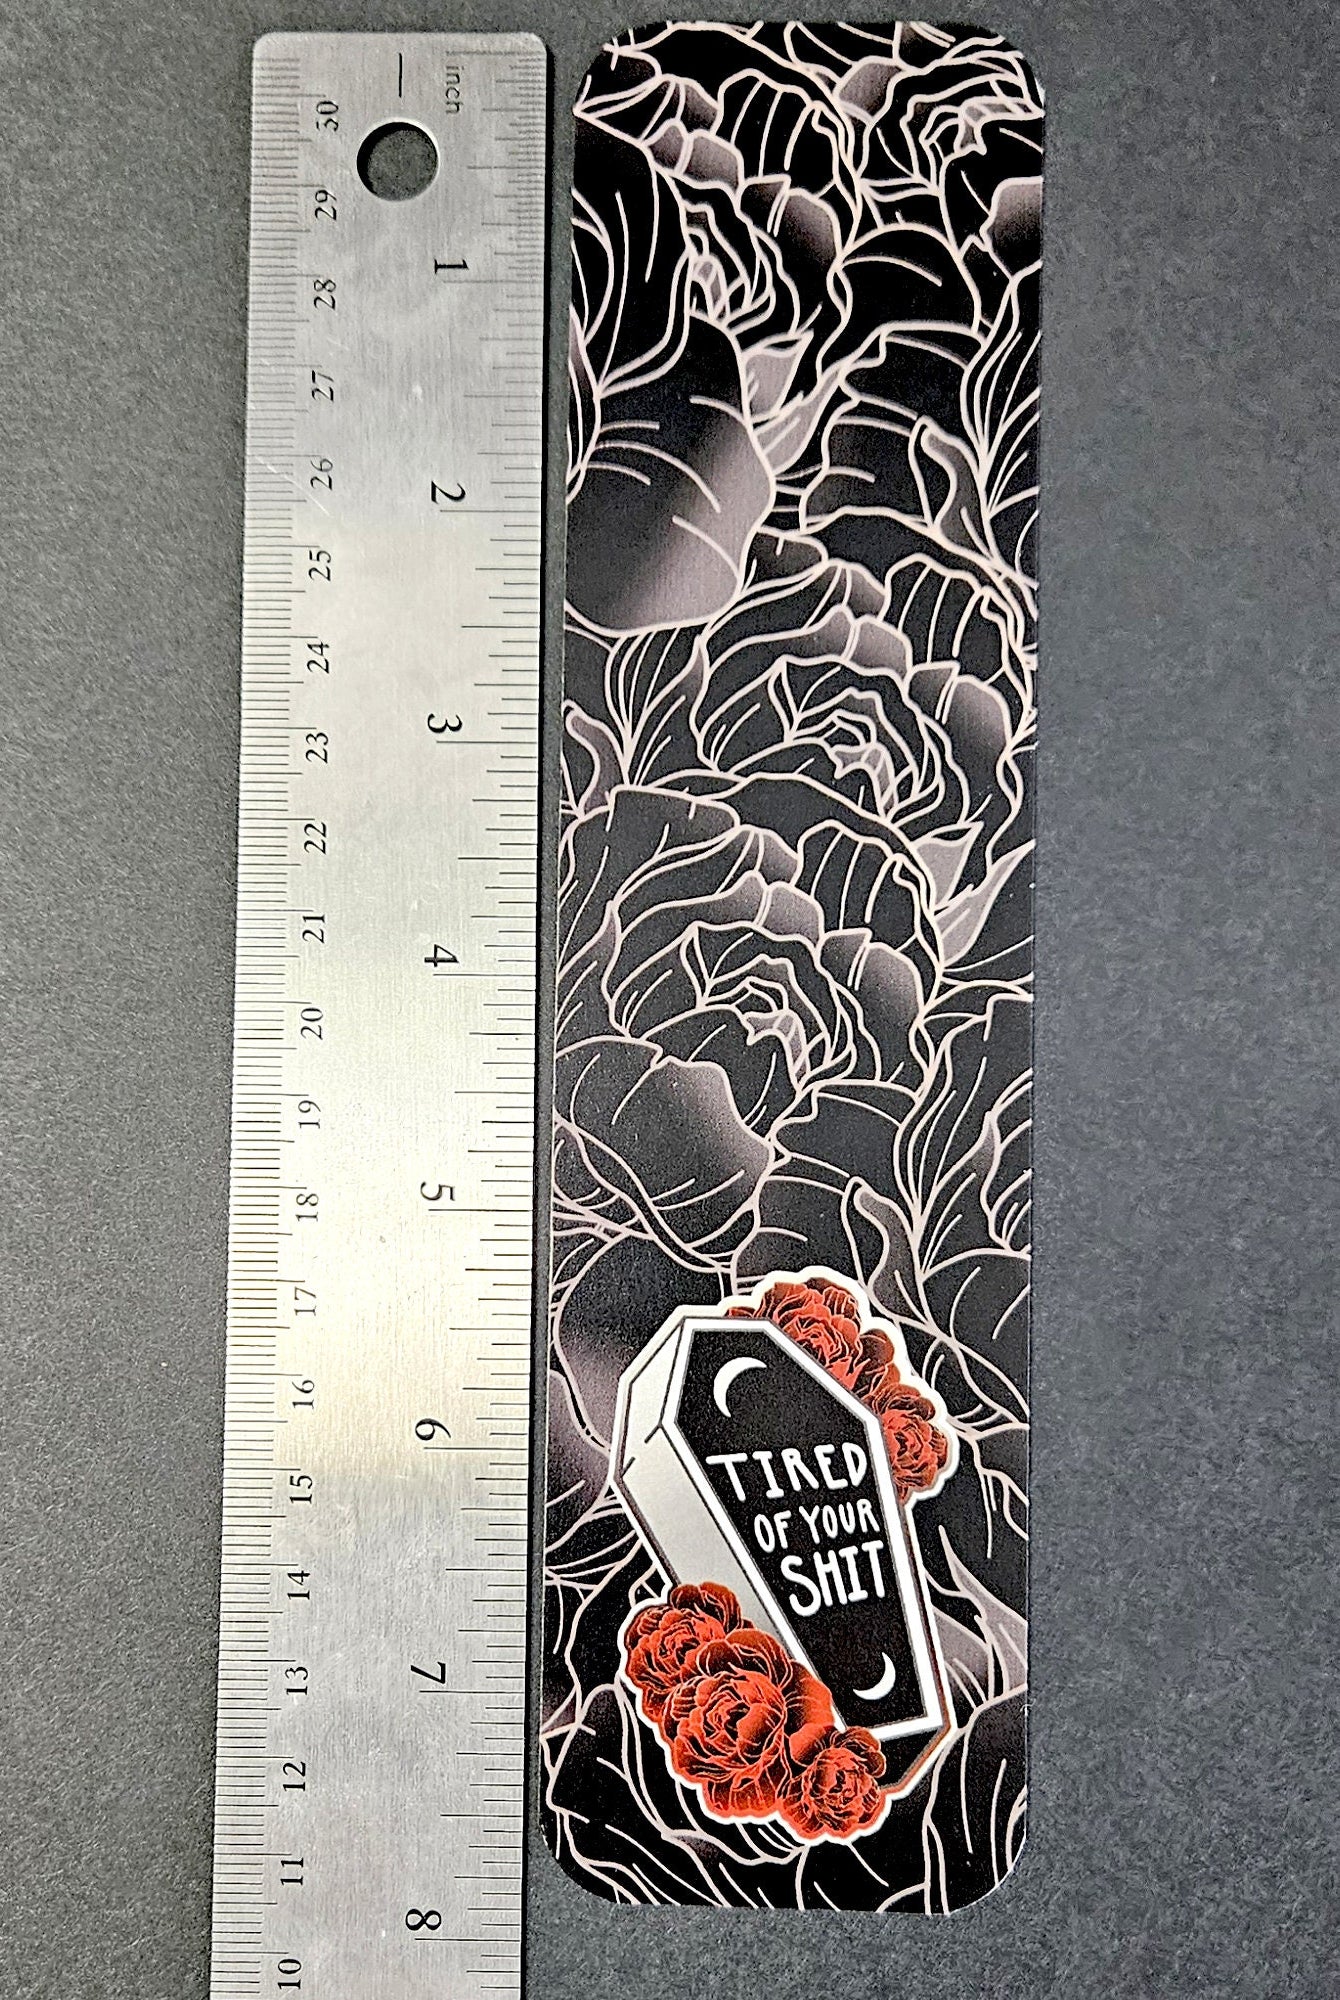 BOOKMARK: Tired of Your Shit Coffin , Coffin and Roses Bookmark , Tired of Your Shit Bookmark , Black Coffin and Roses Bookmark